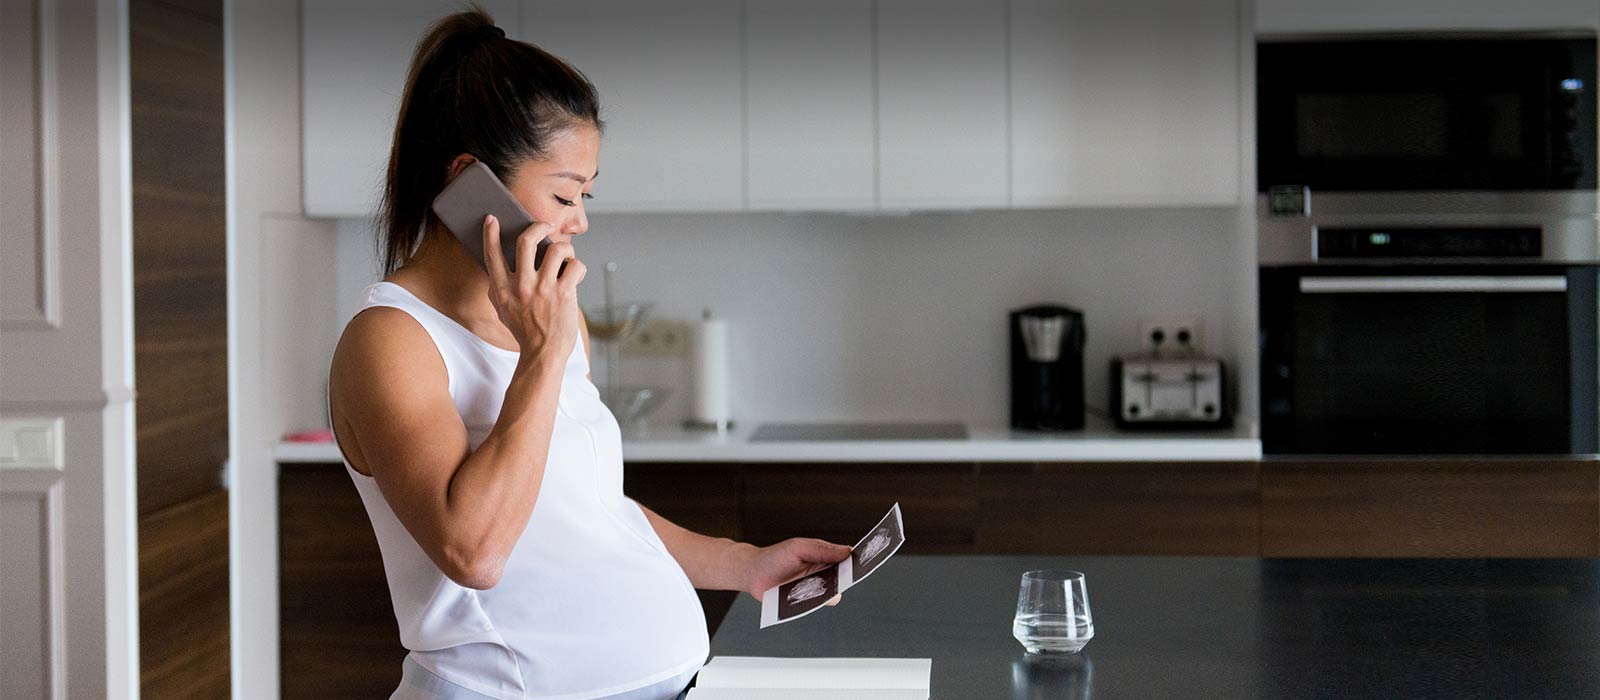 Pregnant woman on phone viewing sonogram image in kitchen.